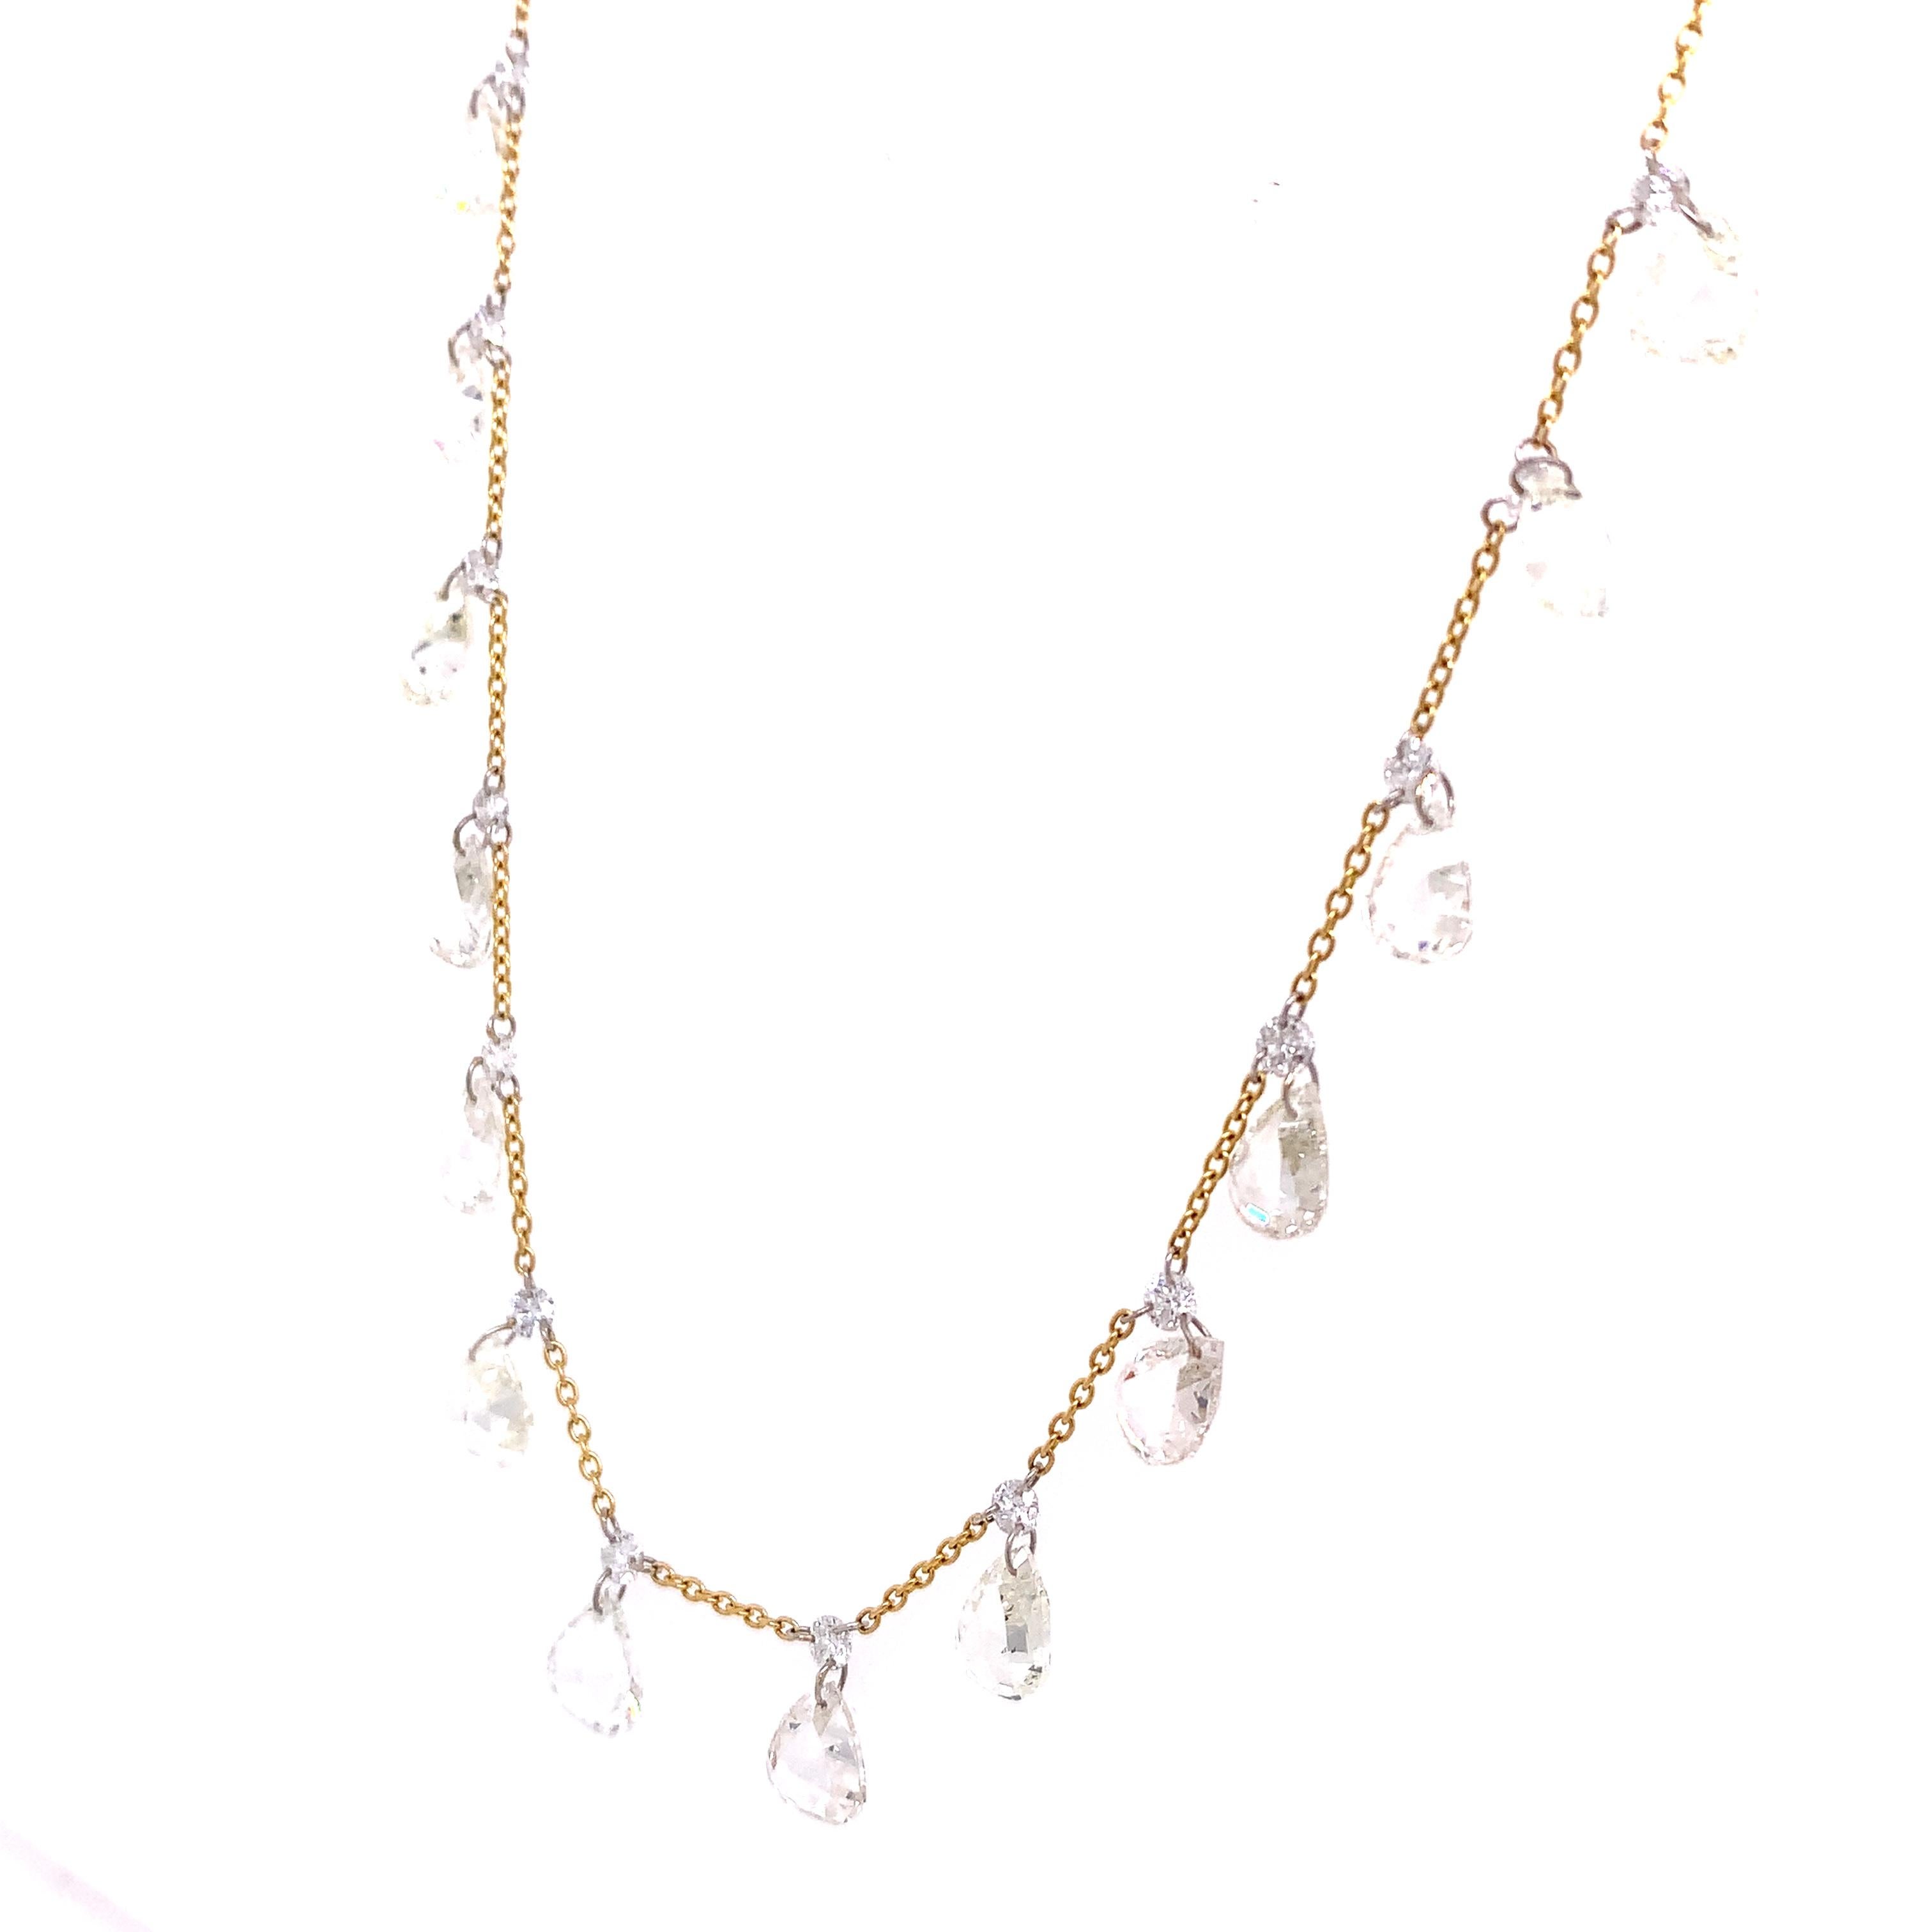 The elegant grace of an adjustable Yellow Gold chain combined with a dazzling fringe of 30 brilliant Rose Cut Diamonds in this eye-catching necklace.

